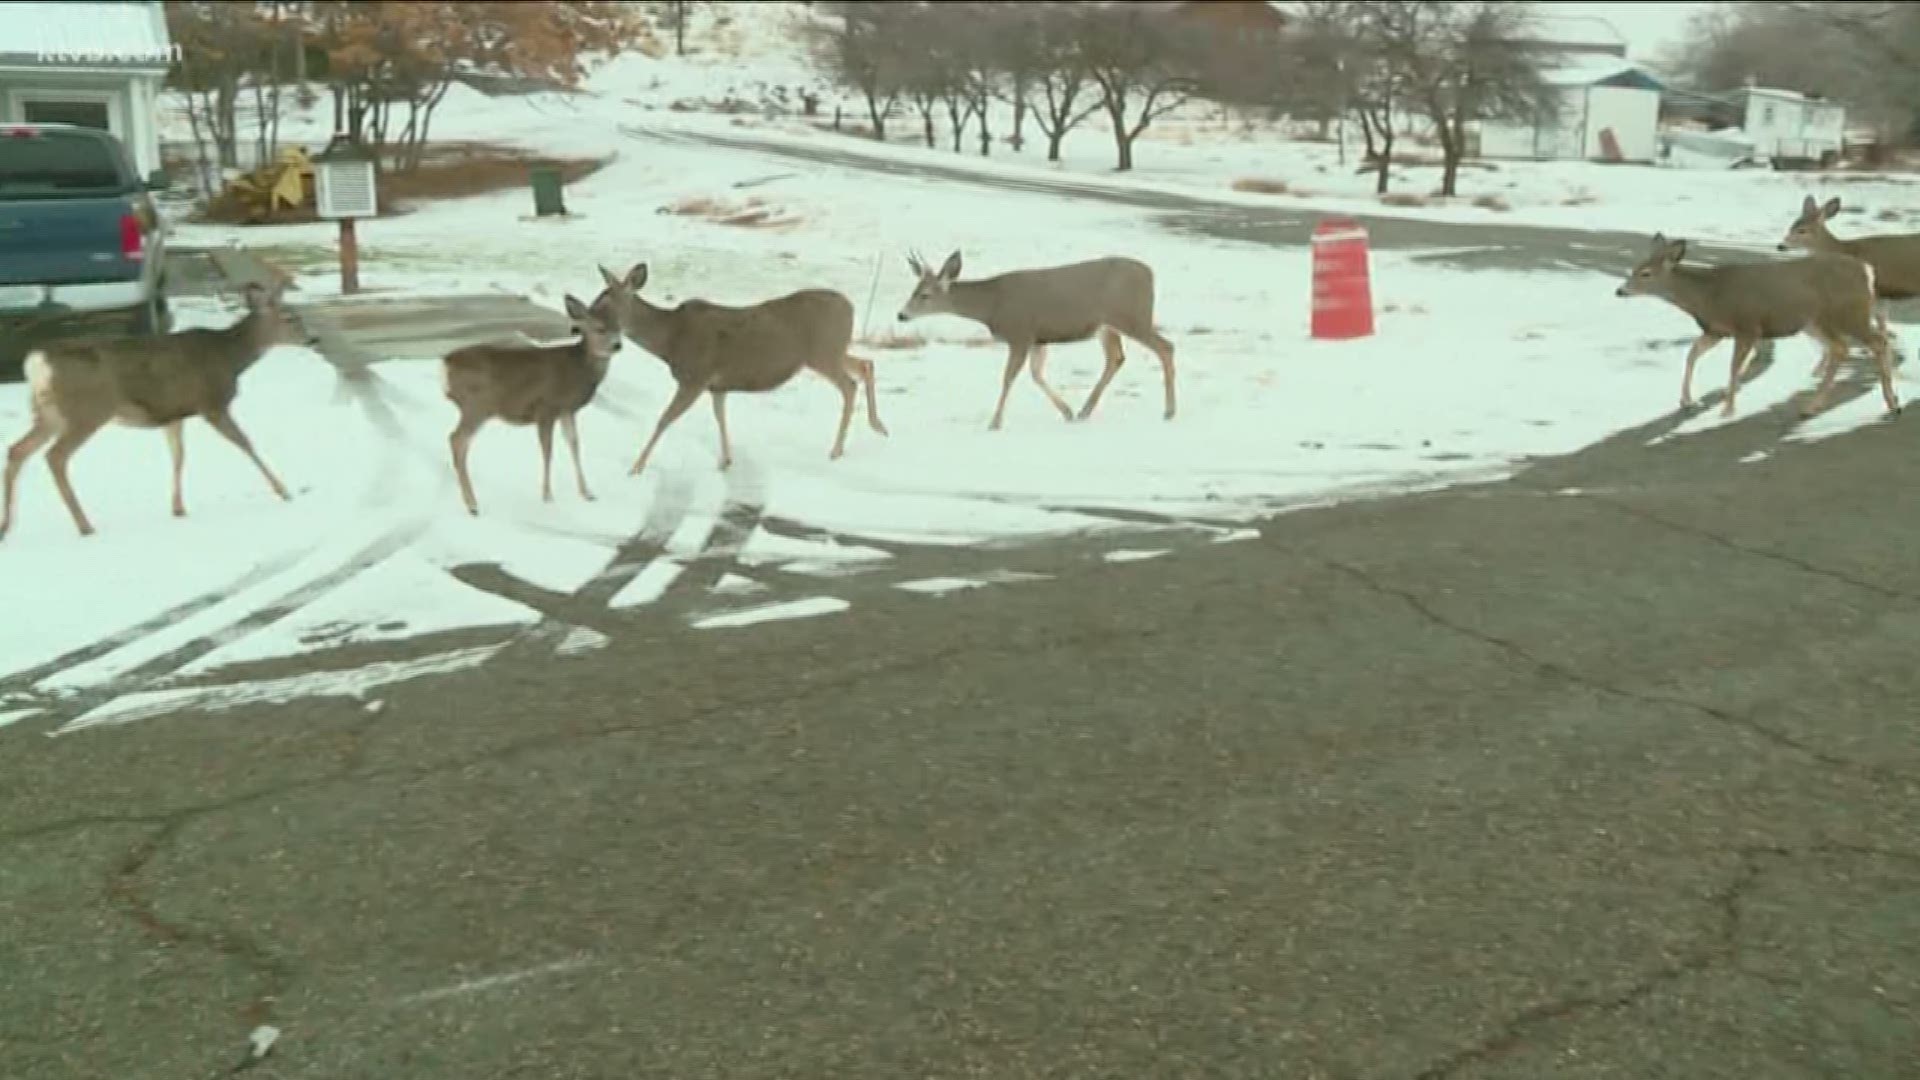 Some who live in Huntington, Oregon are annoyed about the number of deer overrunning the small town, while others think they should be left alone.